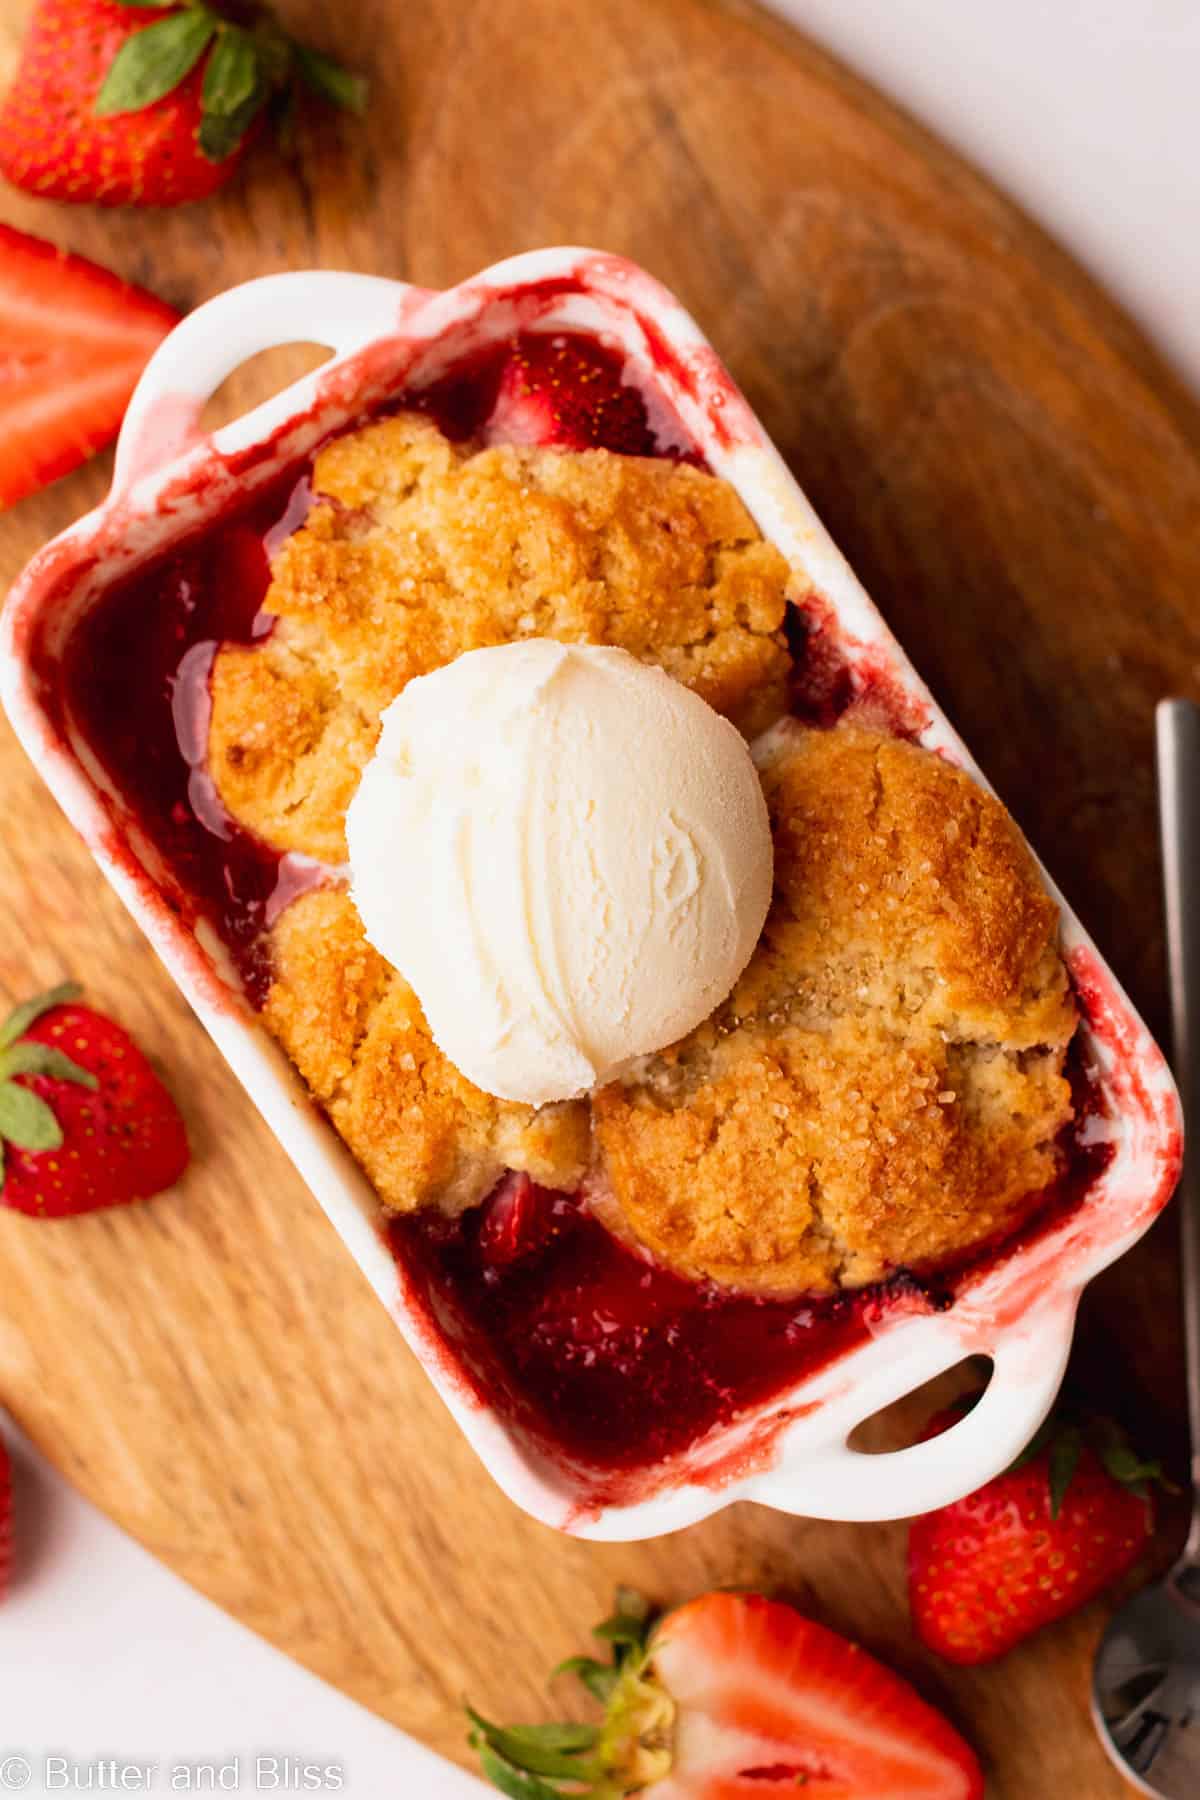 A single mini gluten free strawberry in a baking dish topped with ice cream.